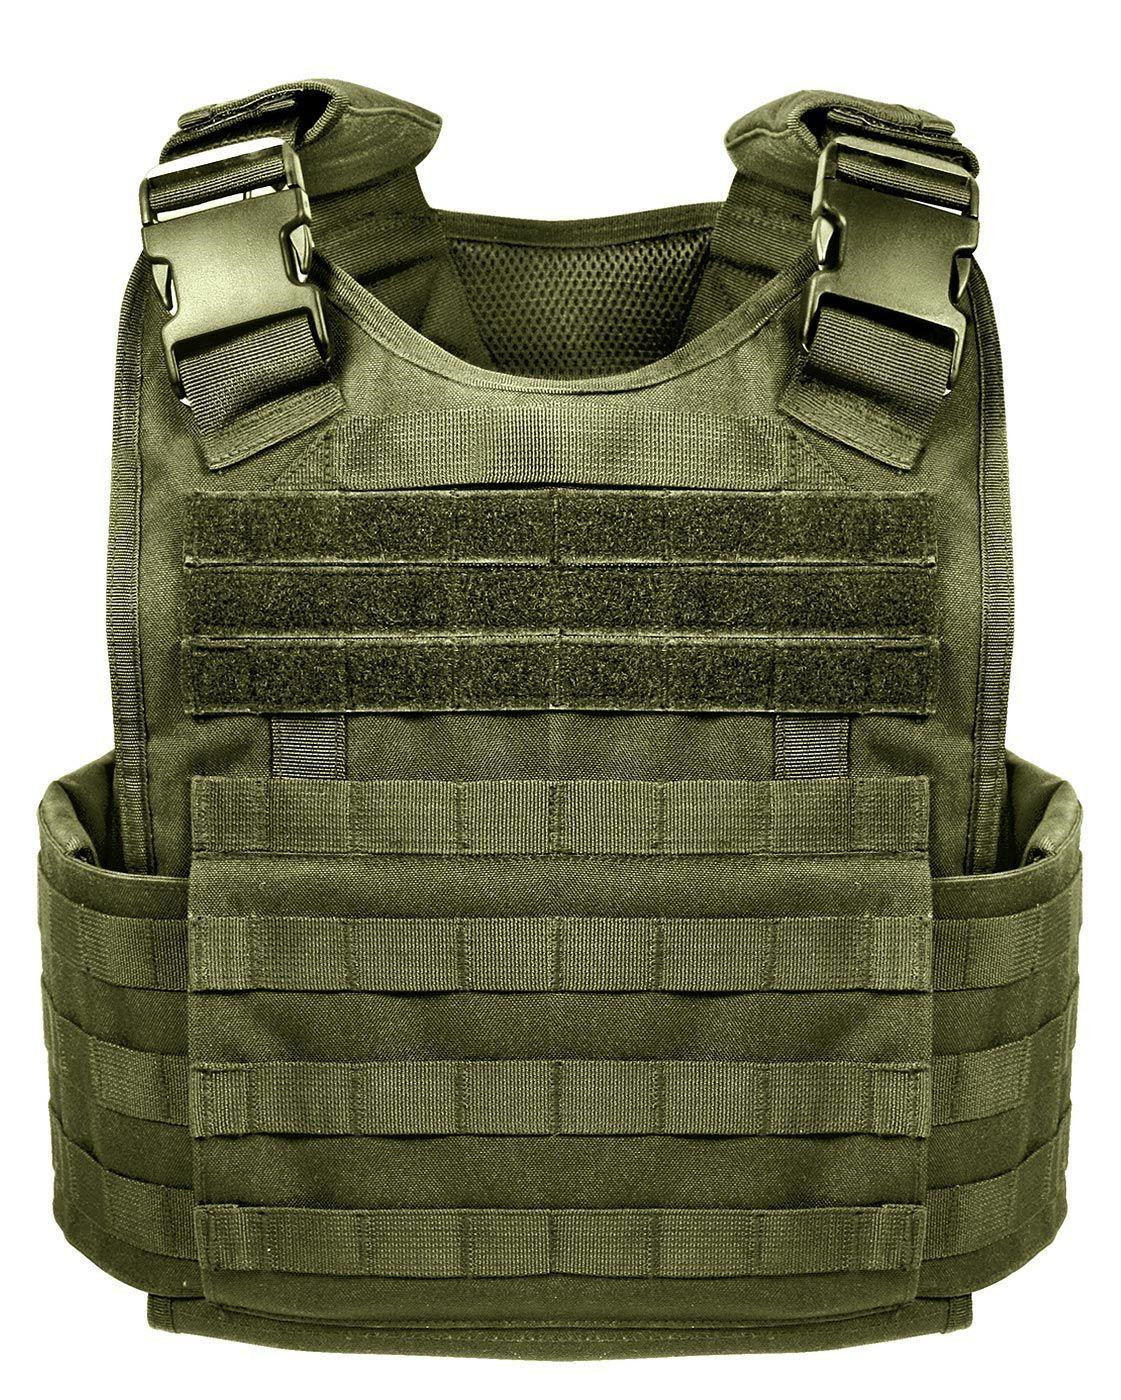 7: Rothco MOLLE Vest (Oliven, One Size)